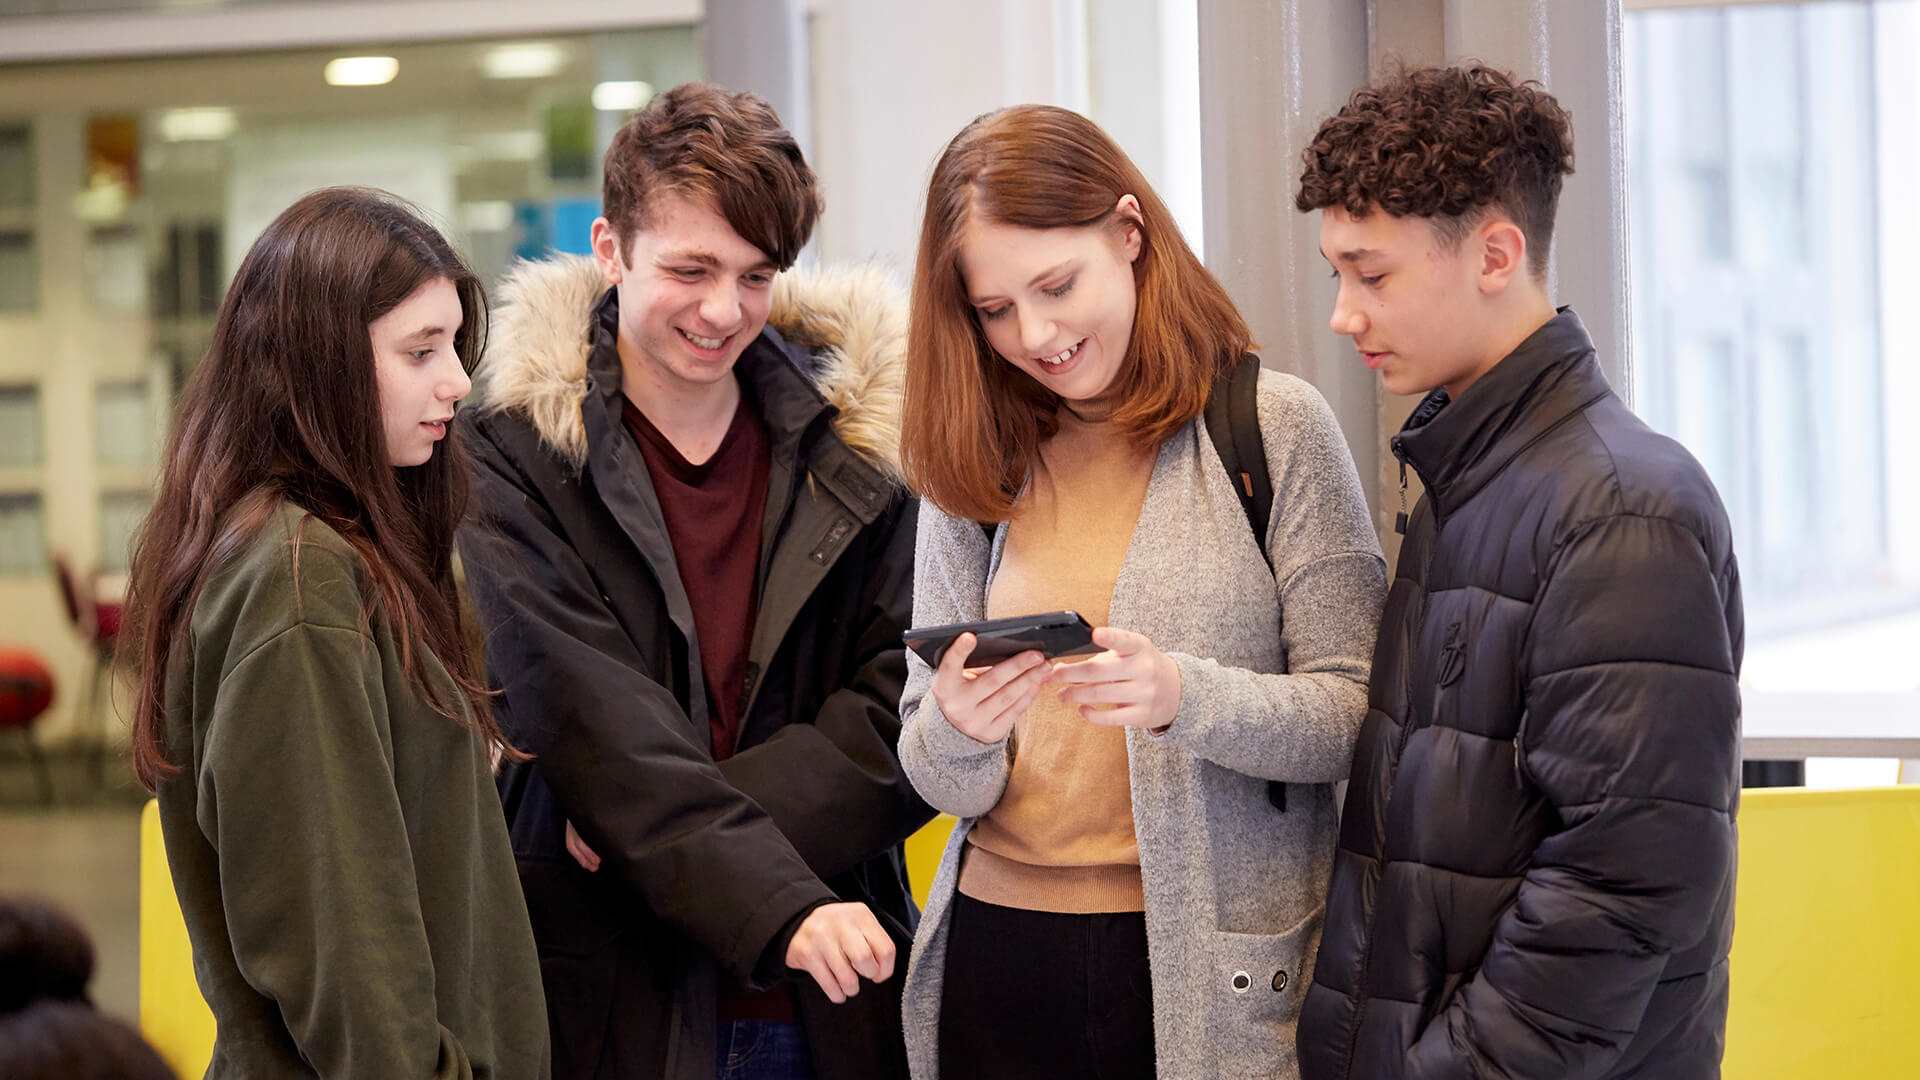 Four-young-people-looking-at-a-phone-and-smiling-while-inside-the-campus